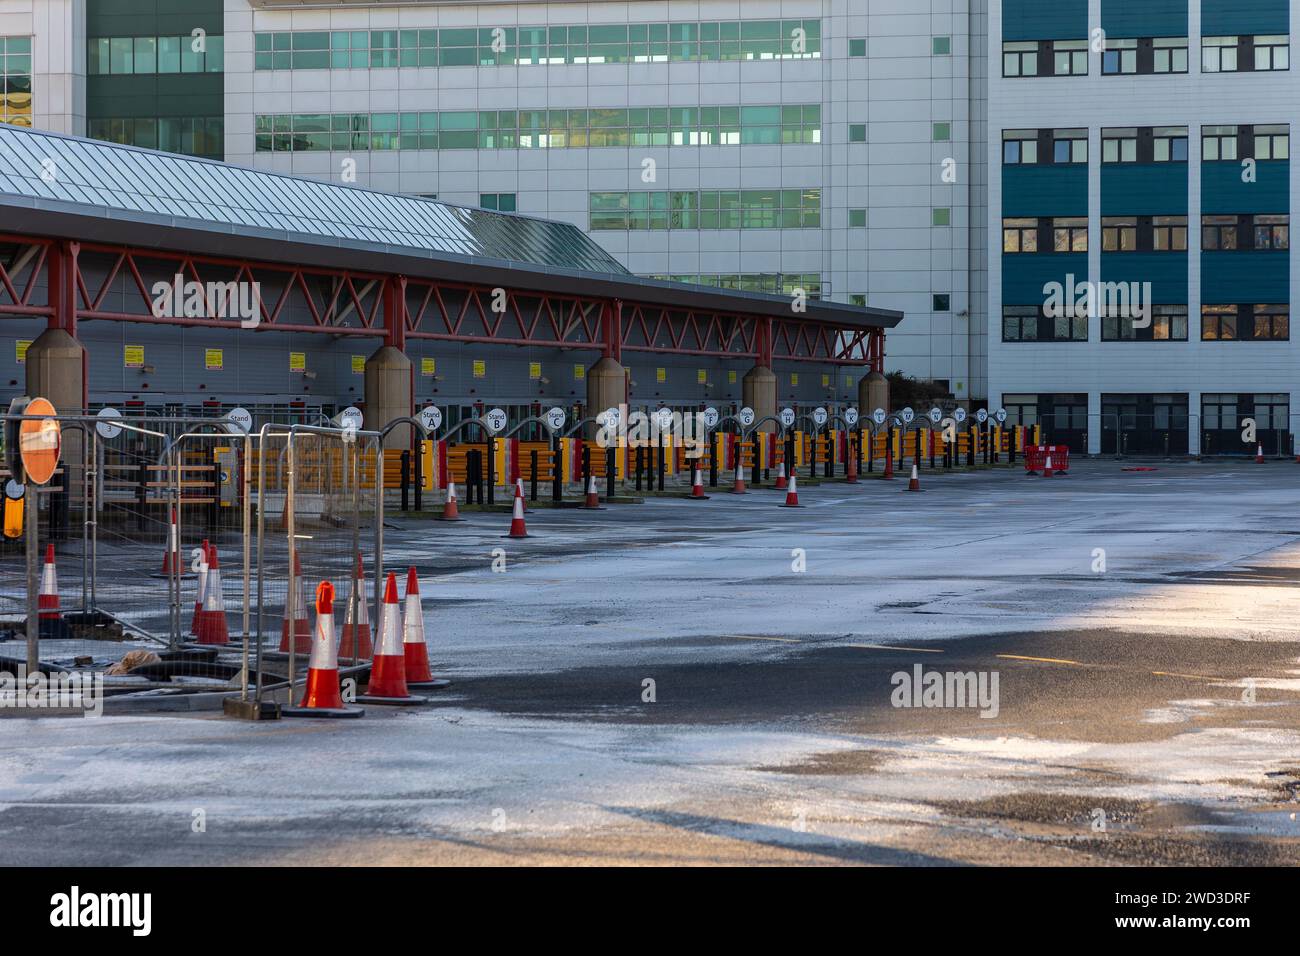 Bradford, UK, 18 January 2024, Bradford Interchange bus station remains closed following reports of damage on 04.01.2024. The bus platforms at Bradford interchange stand empty as the bus station is closed. Credit: Neil Terry/ Neil Terry Photography Stock Photo